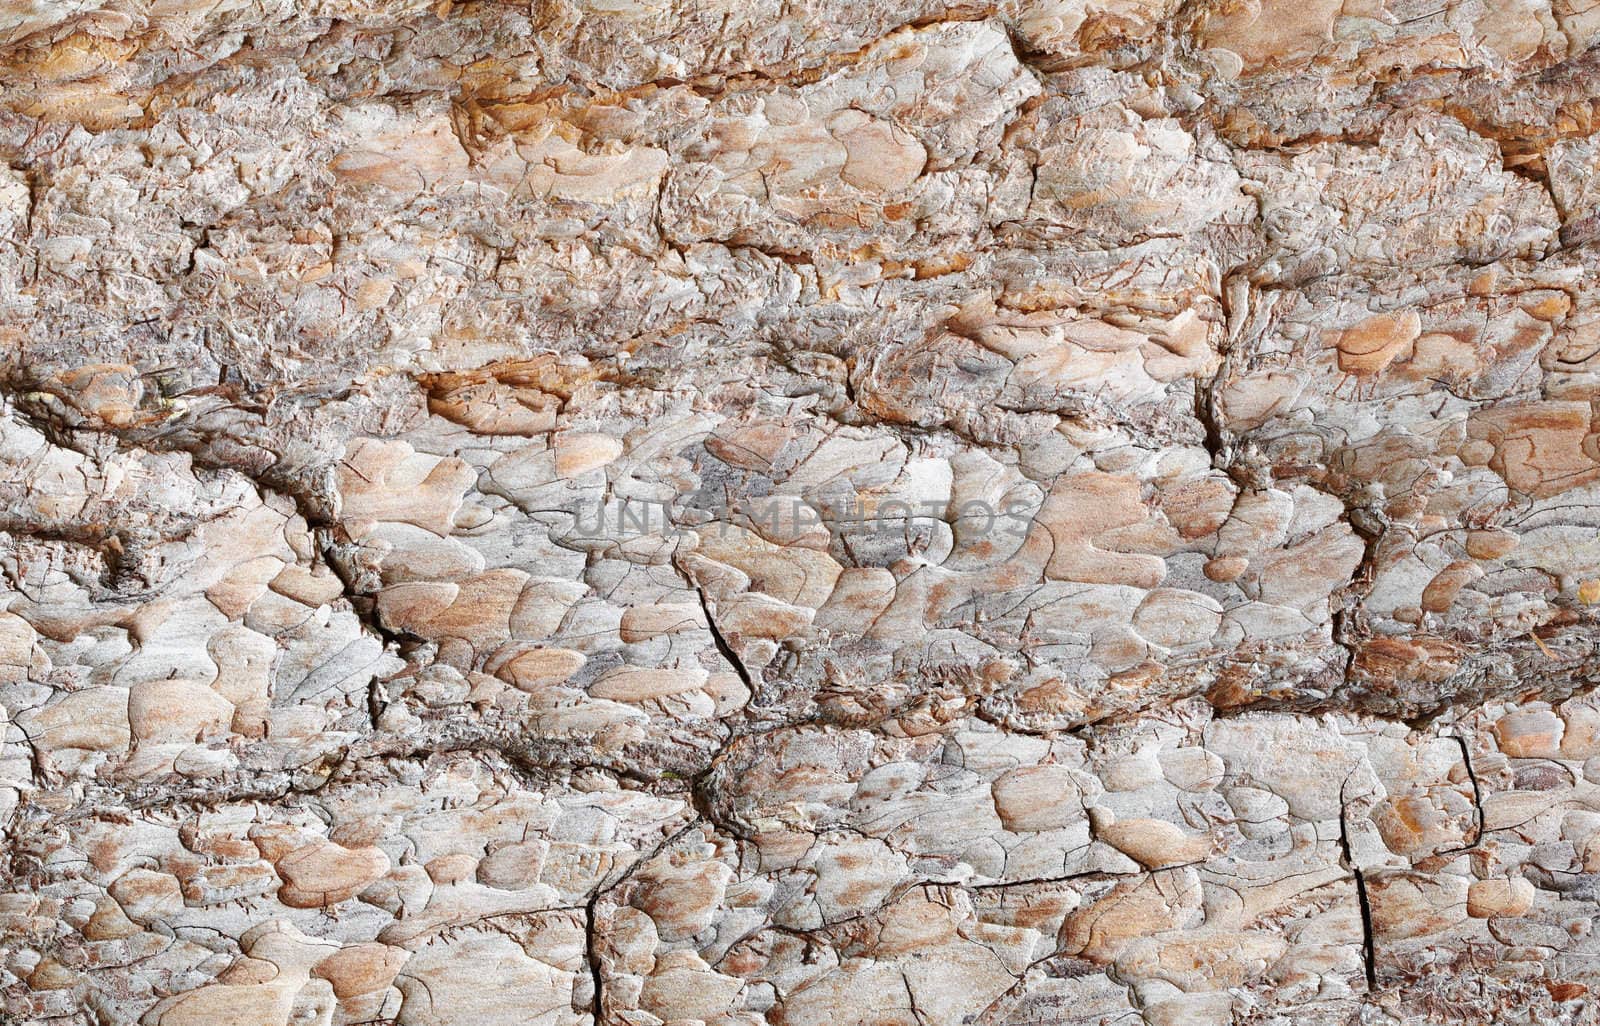 Brown surface of a pine bark - a horizontal background